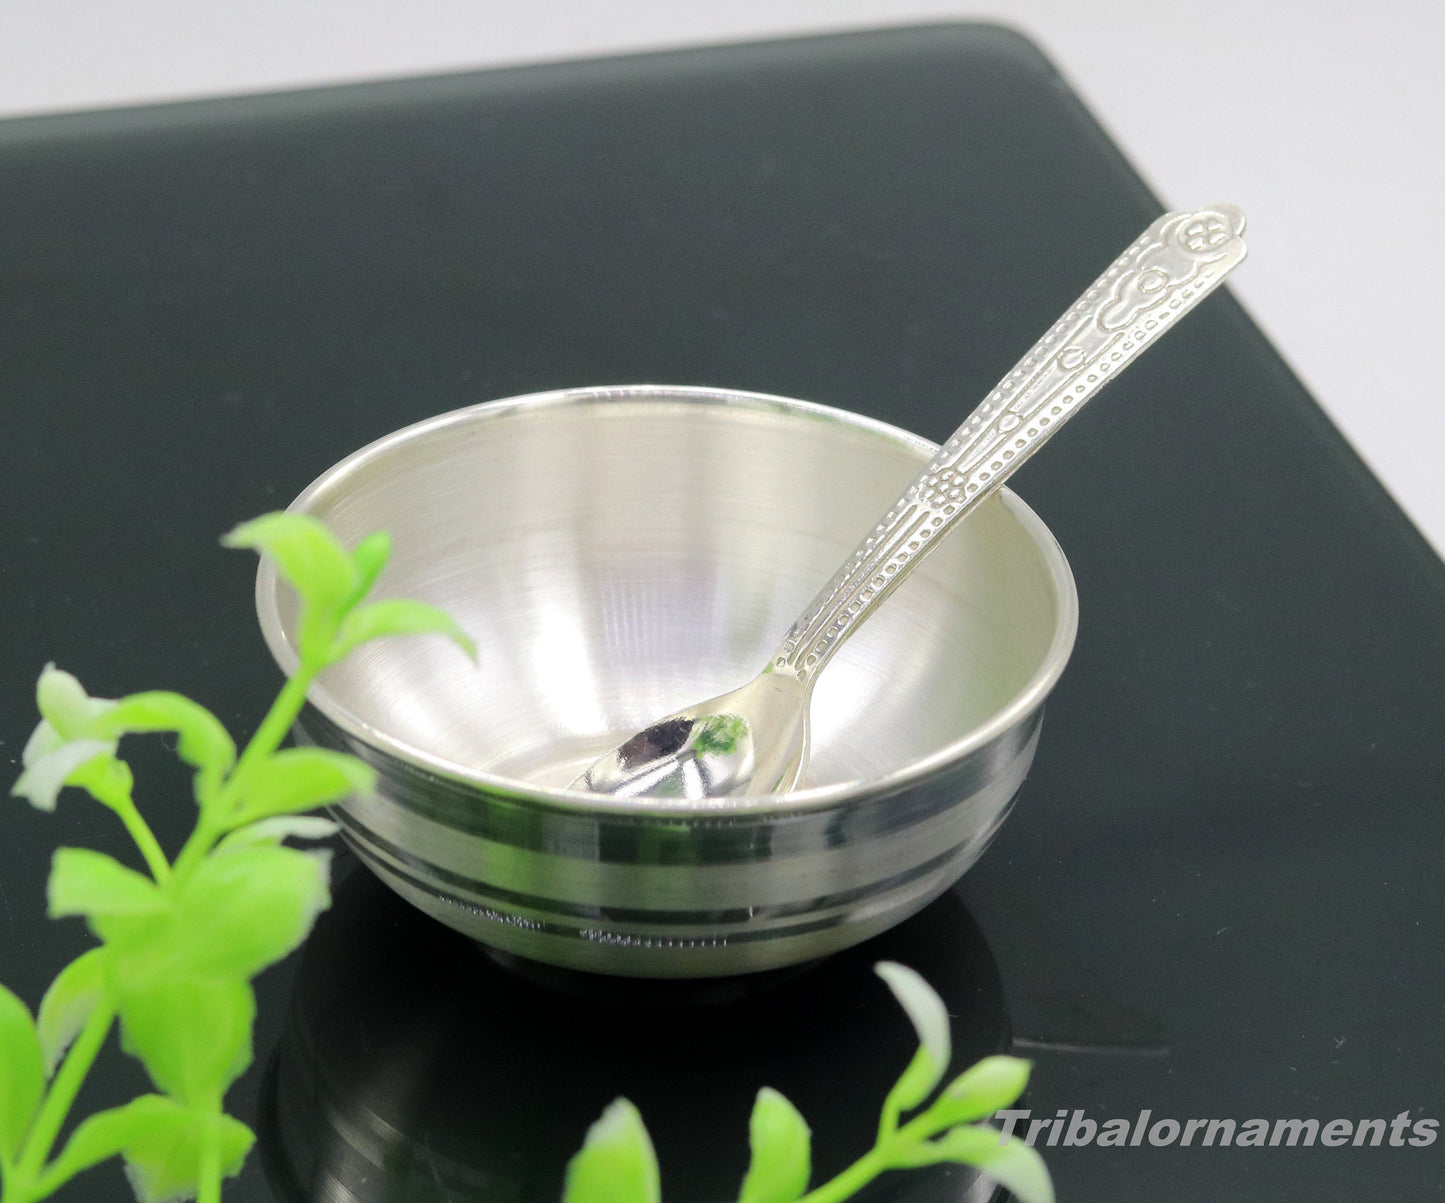 999 fine solid silver handmade small bowl for baby food, pure silver vessels, silver utensils, home and kitchen accessories india sv29 - TRIBAL ORNAMENTS